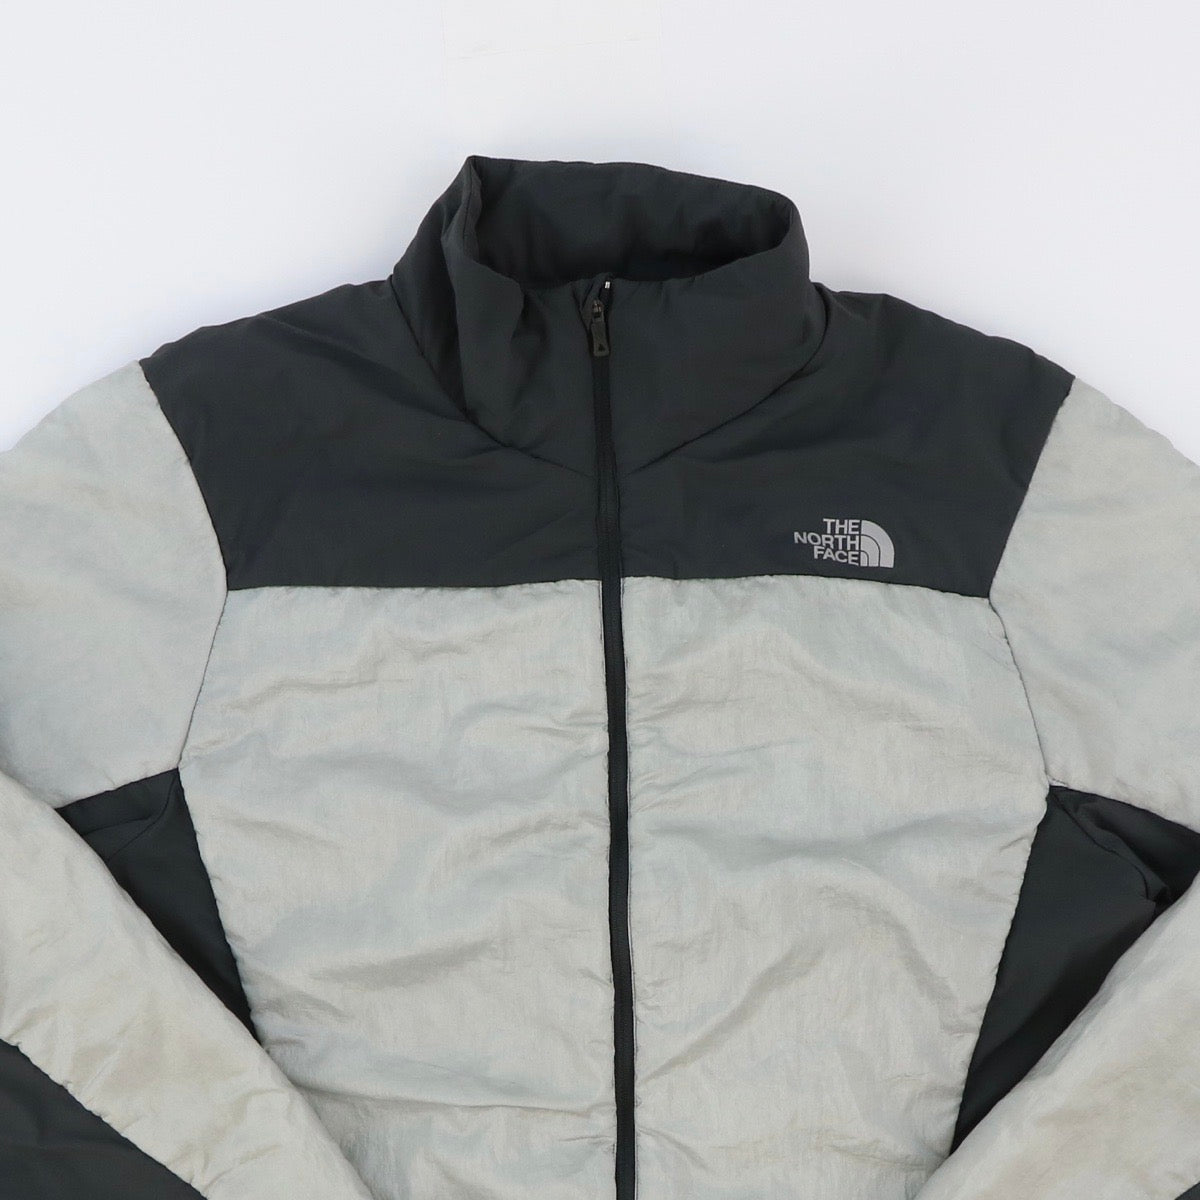 The North Face jacket (S)